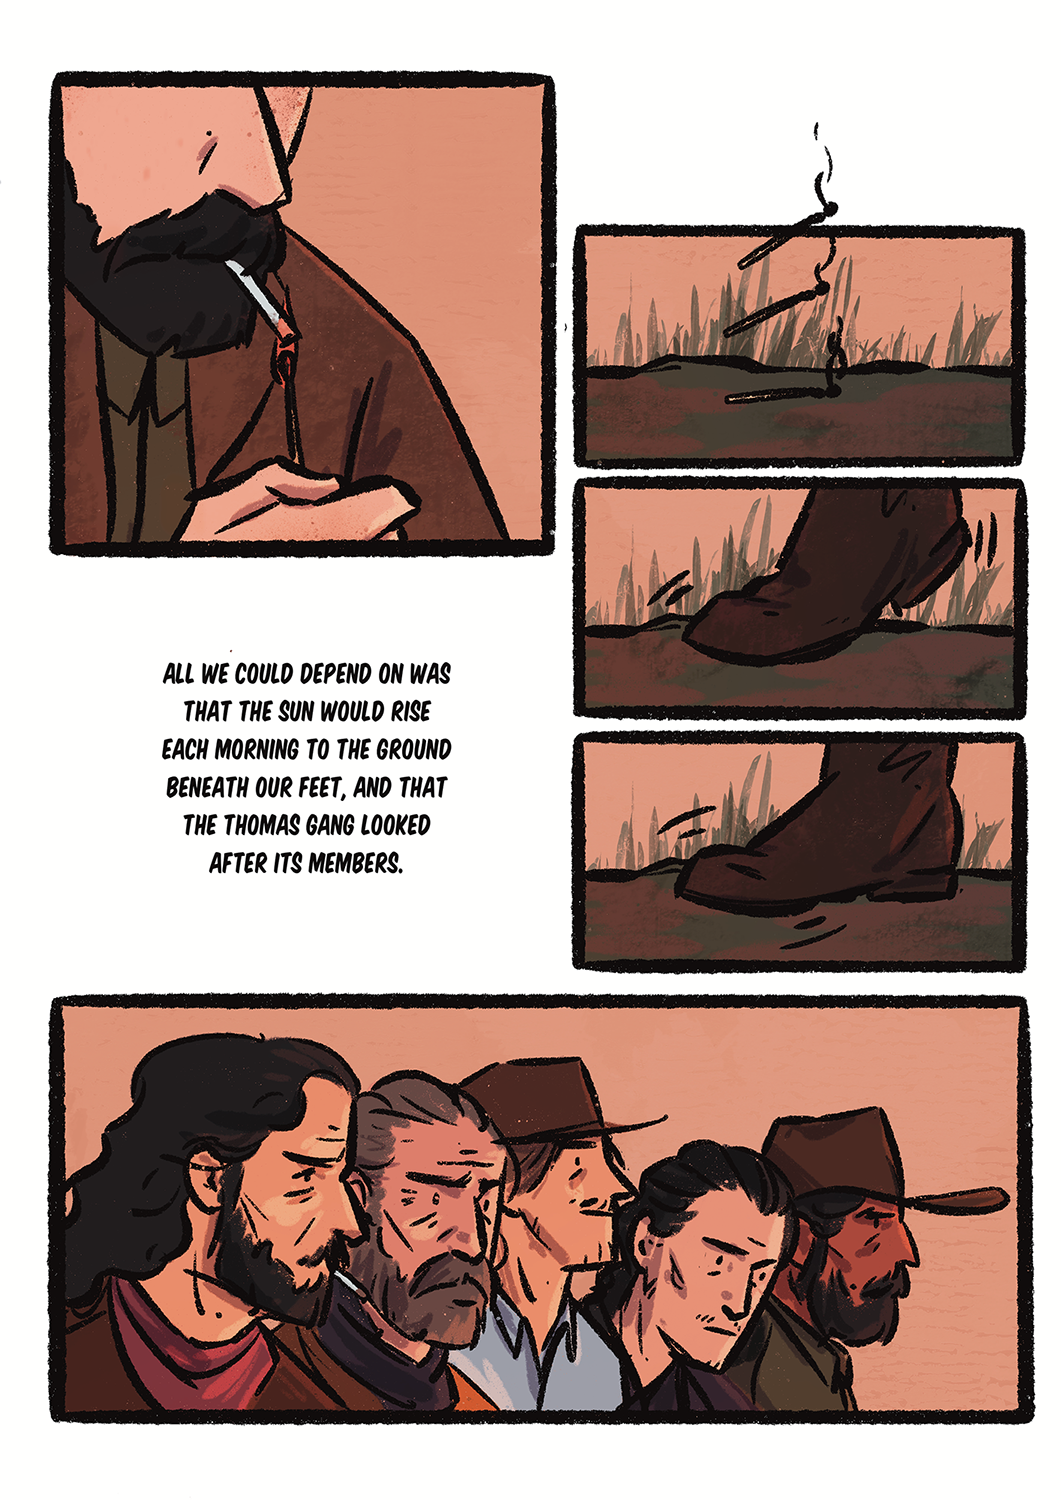 Page 4 of Western Comic Before They Lay You Down by Georgia Holland, introducing the antagonists of the story.